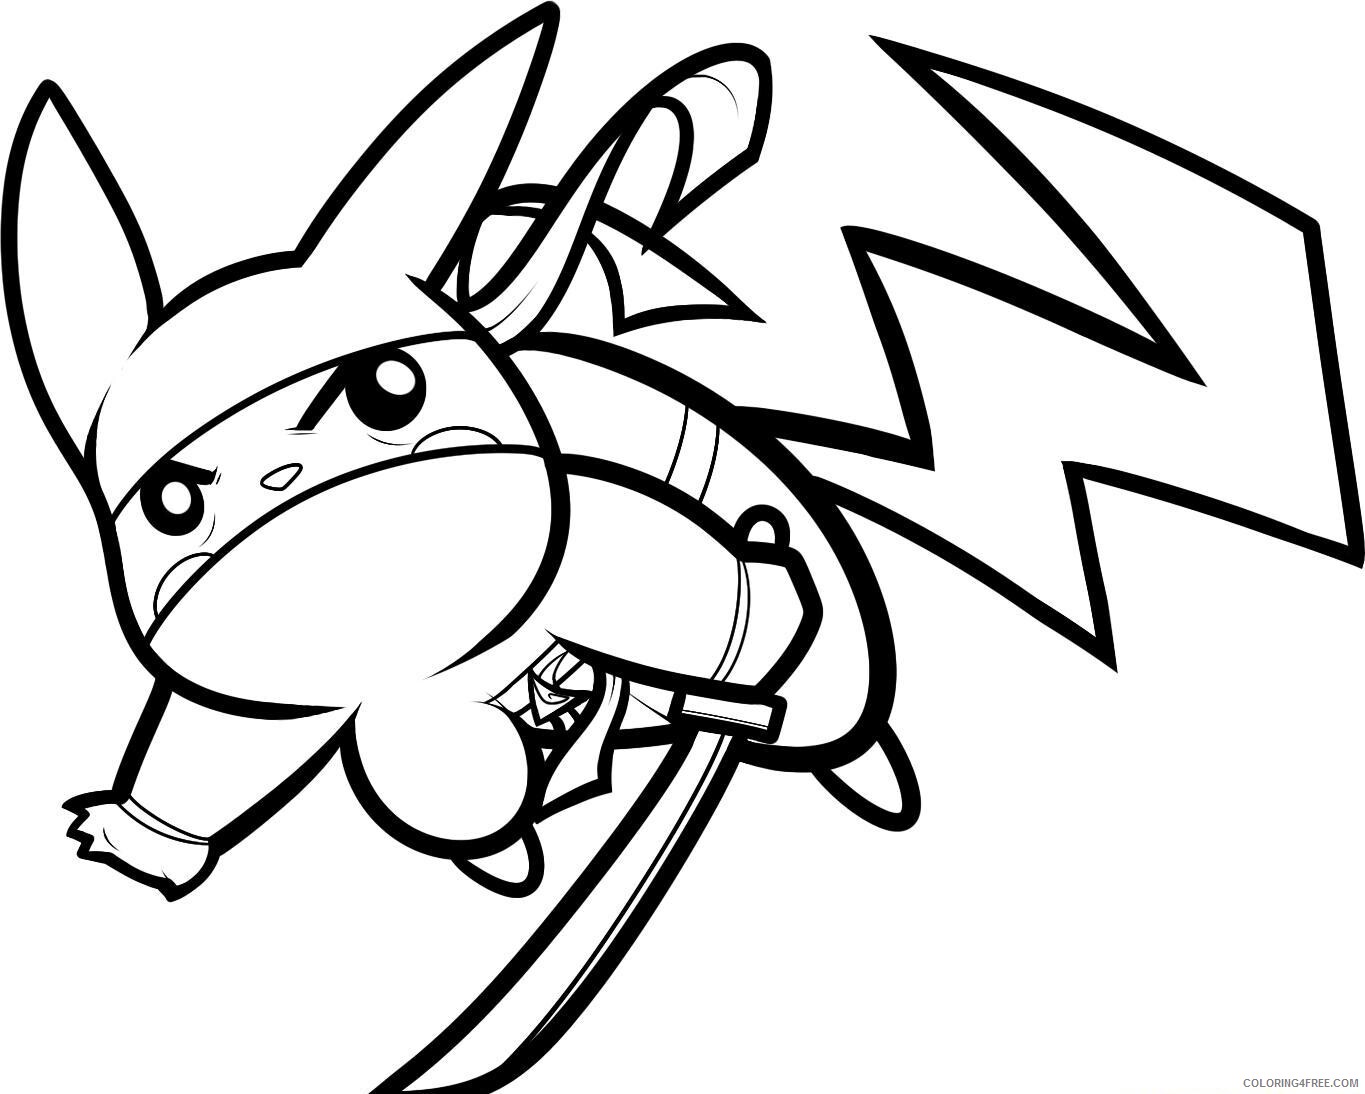 Pikachu Printable Coloring Pages Anime 1529547576_40 2021 0928 Coloring4free